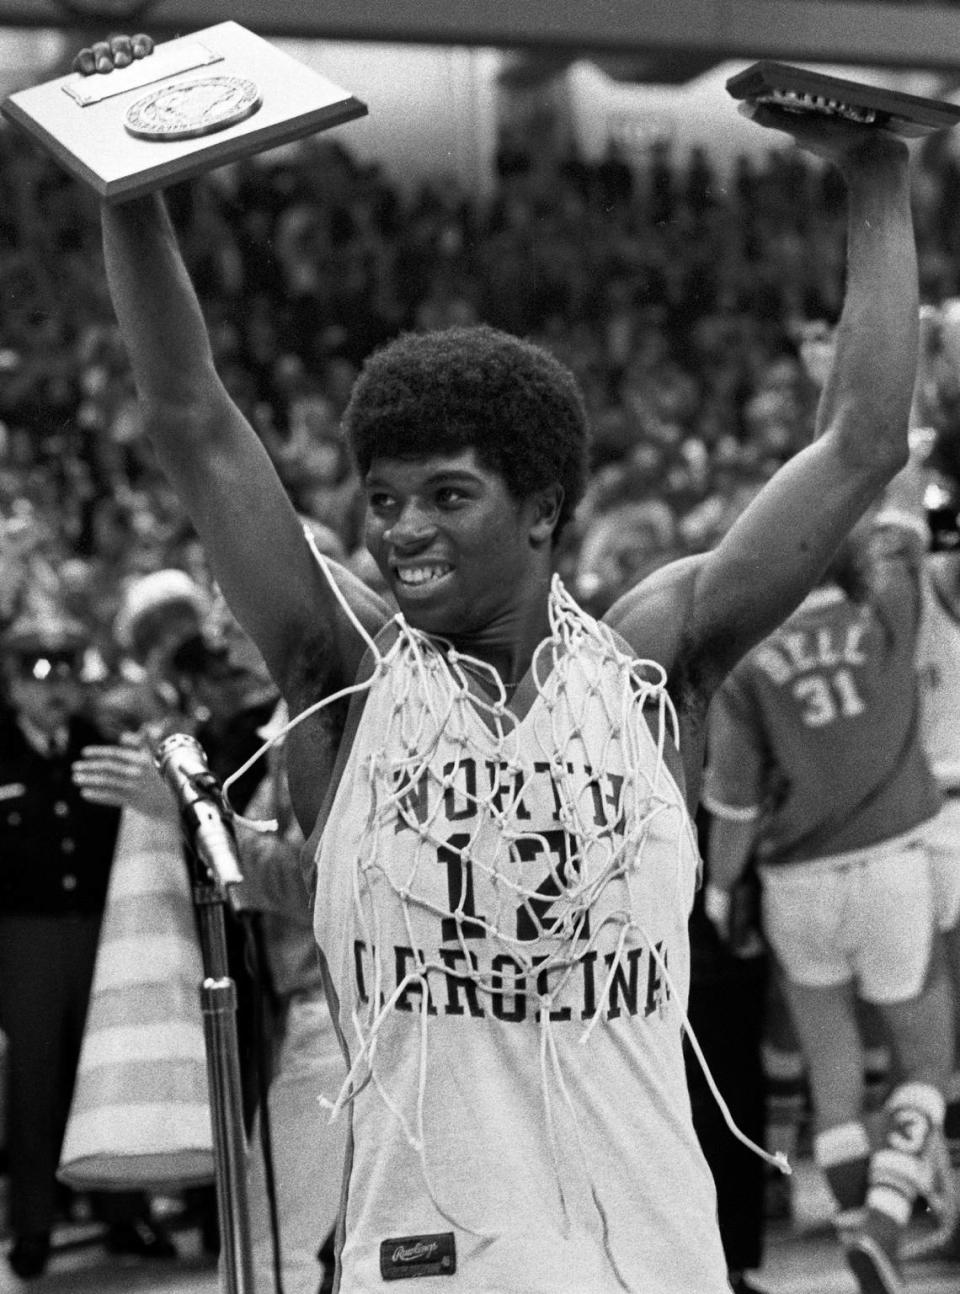 Phil Ford celebrates the Tar Heels’ win over N.C. State in the championship game of the 1975 ACC Tournament.